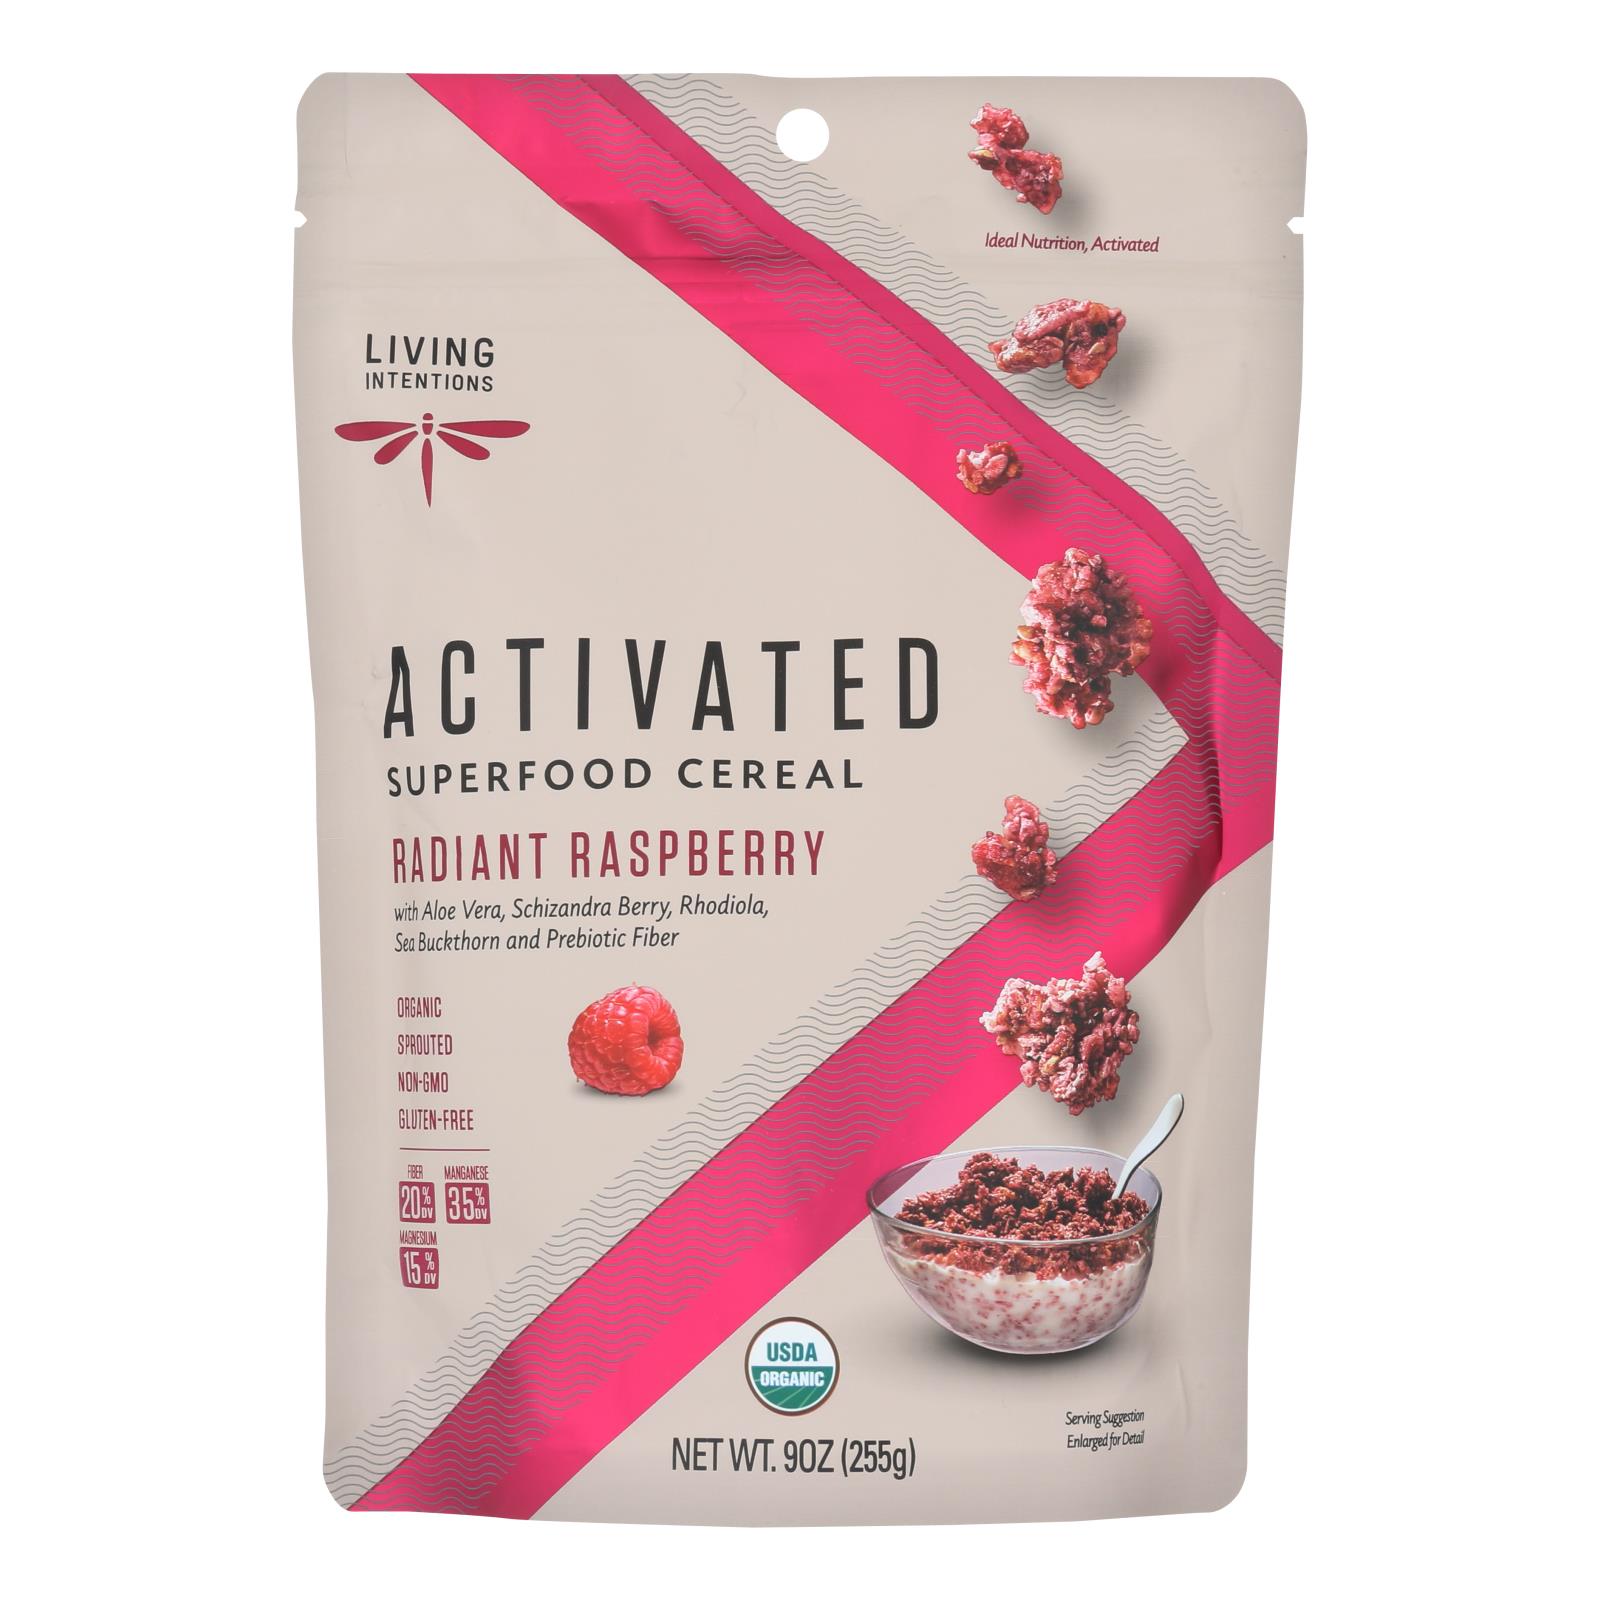 Living Intentions Activated Superfood Cereal - 6개 묶음상품 - 9 OZ